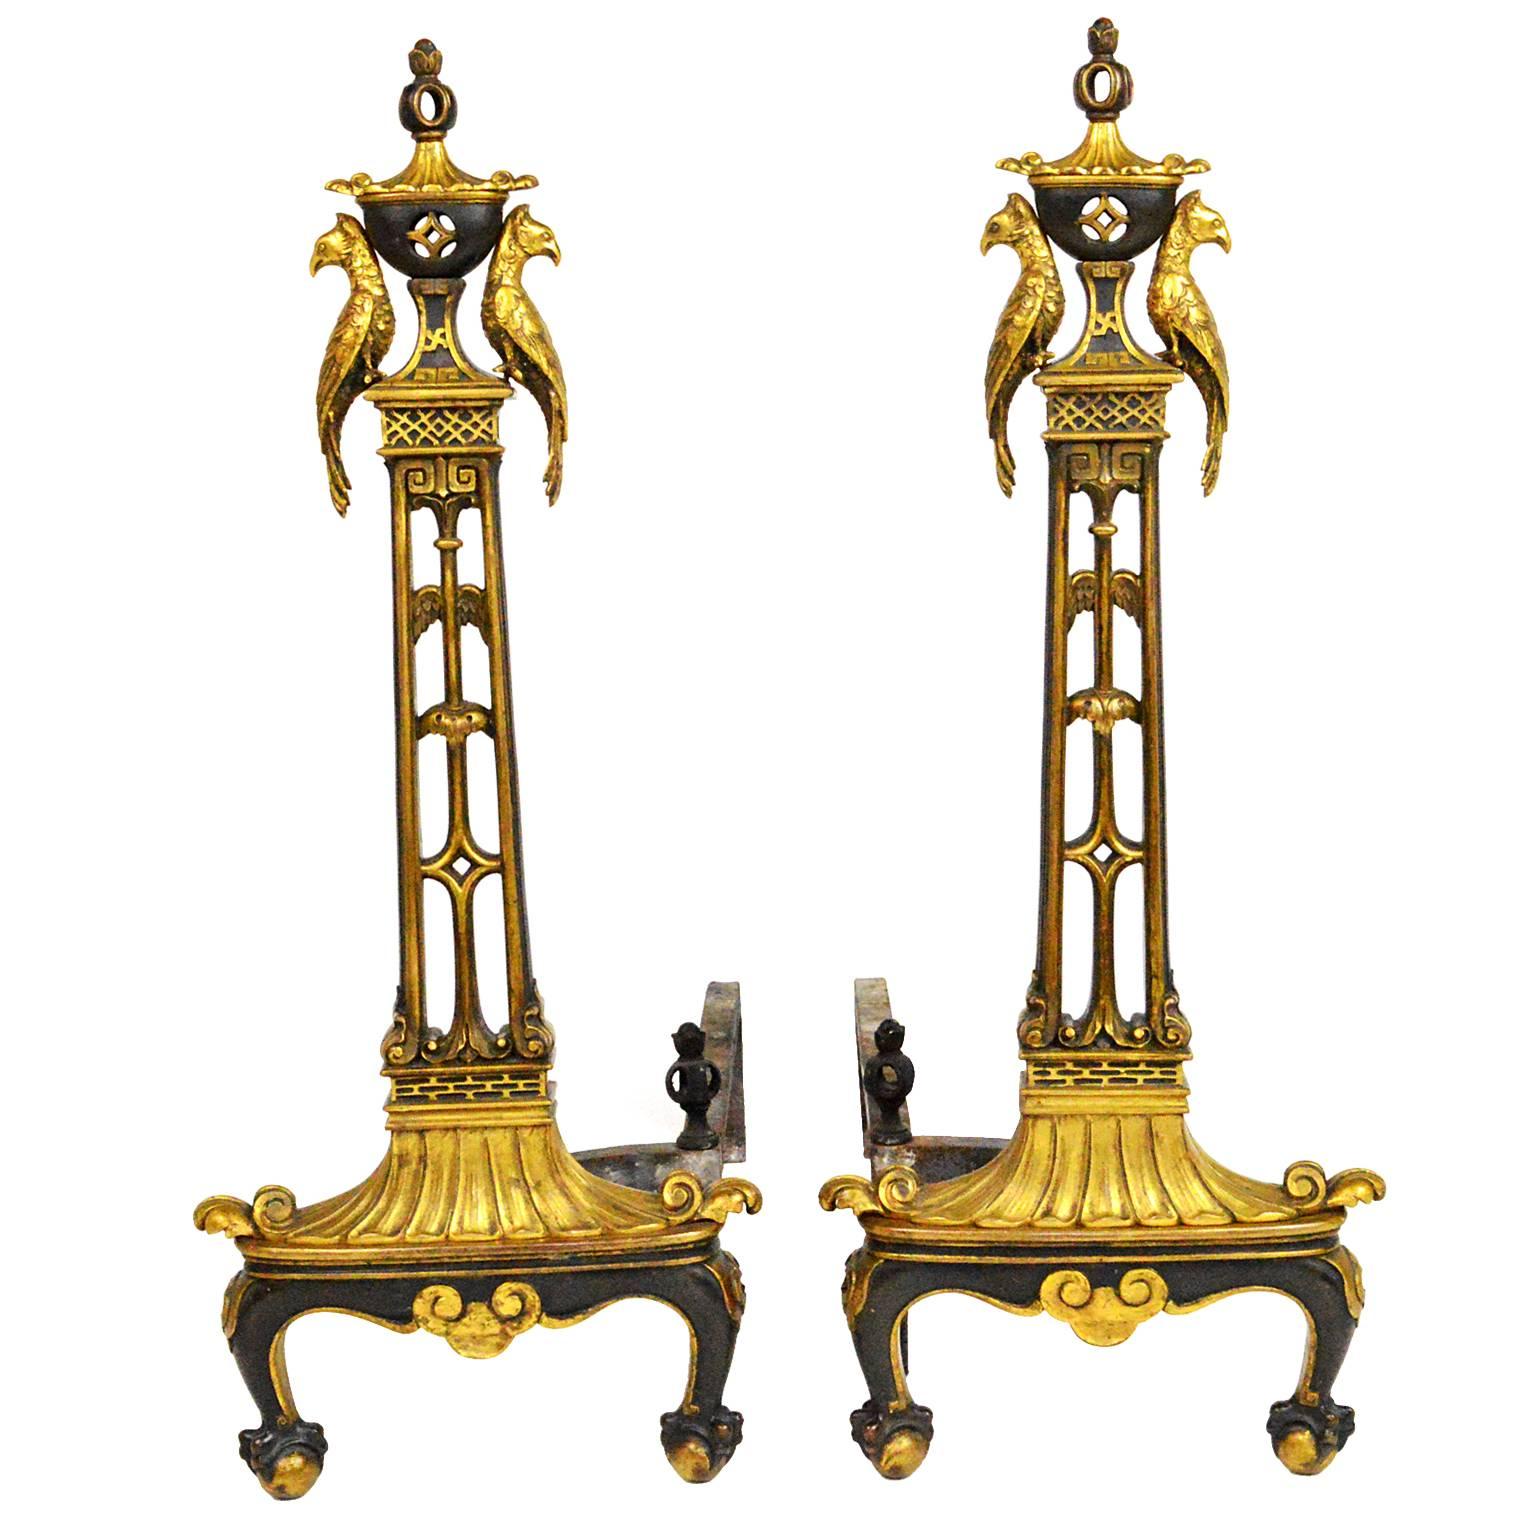 Pair of Chinese Chippendale Style Gilt and Patinated Bronze Andirons